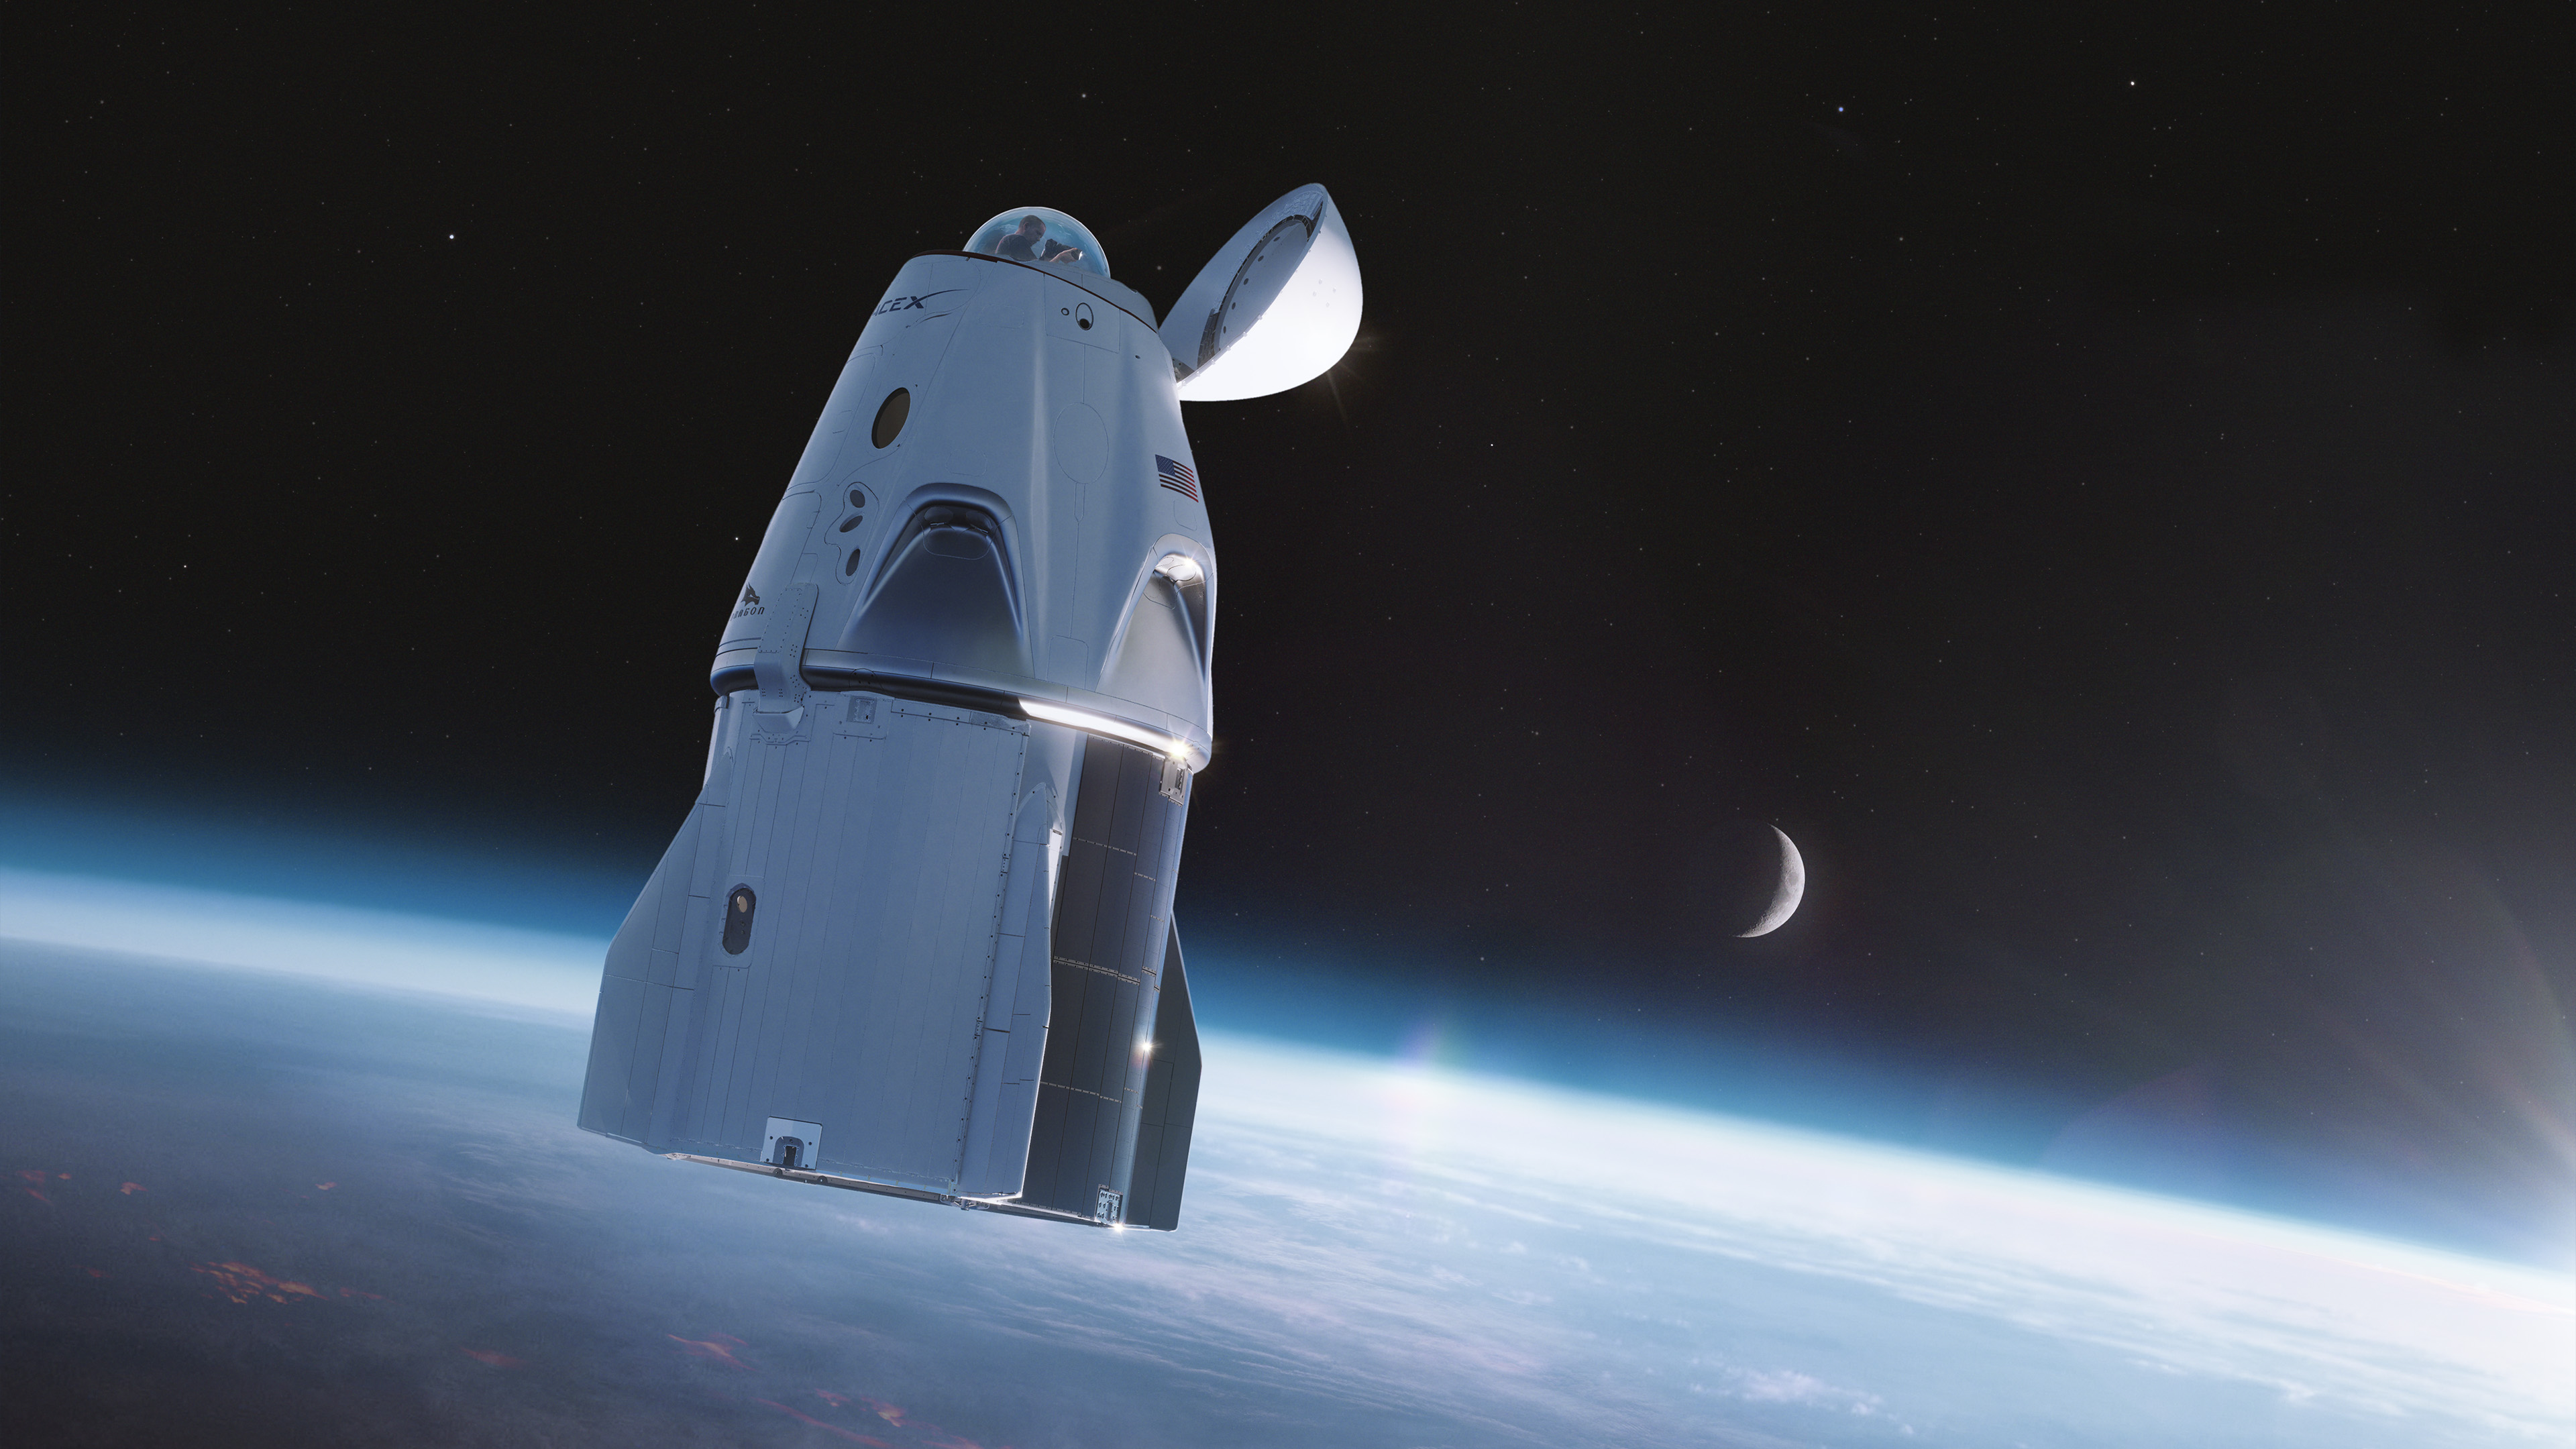 Render of Dragon Capsule with Cupola.